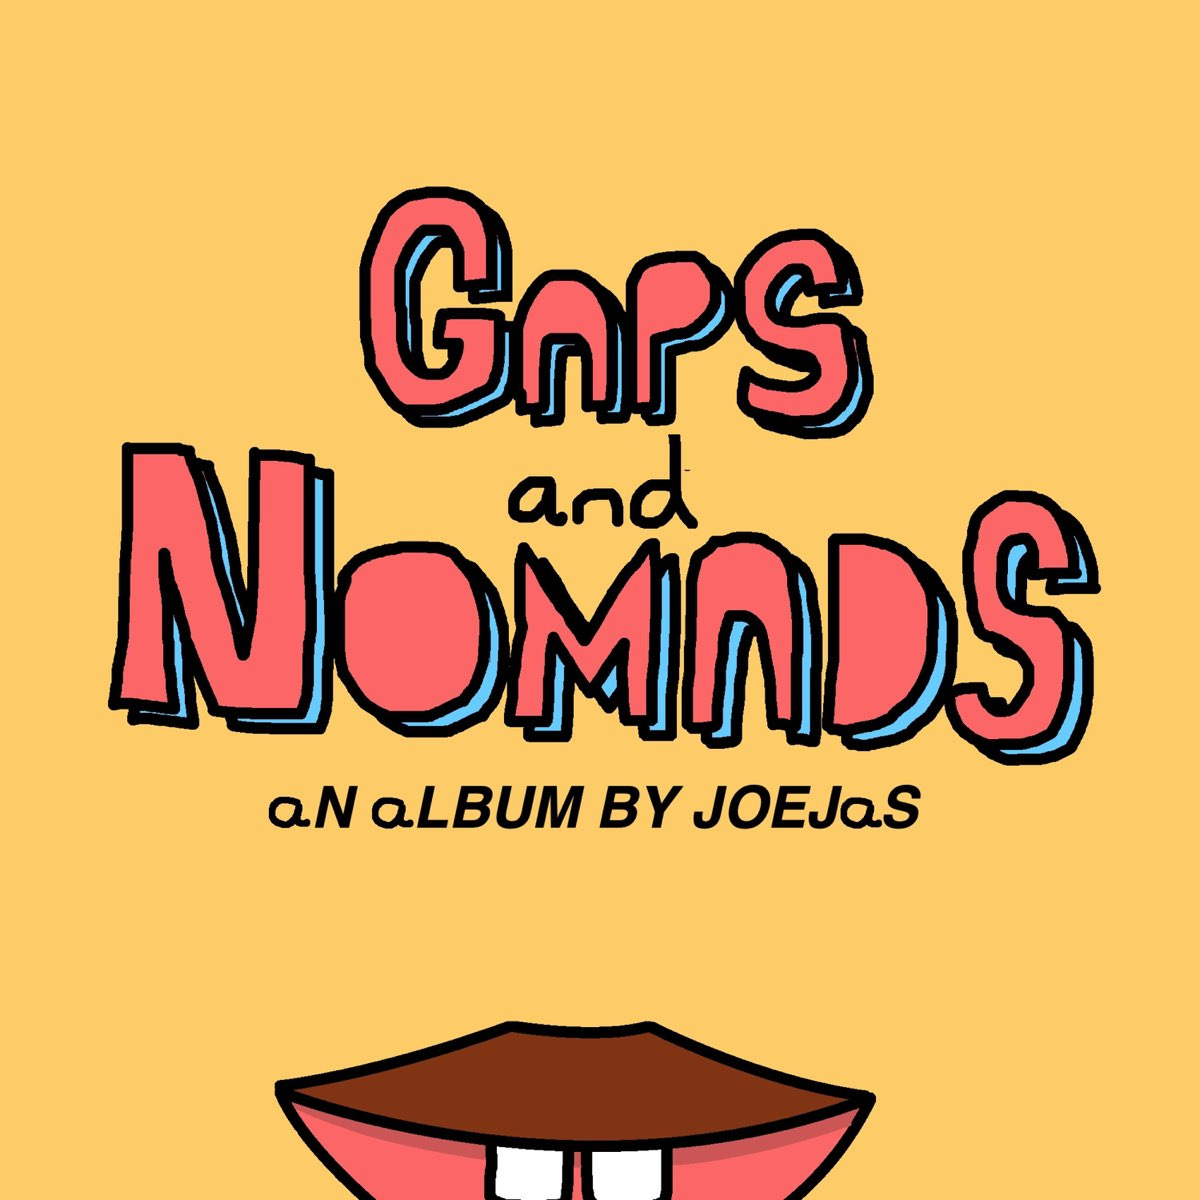 Gaps & Nomads by JoeJas on Apple Music